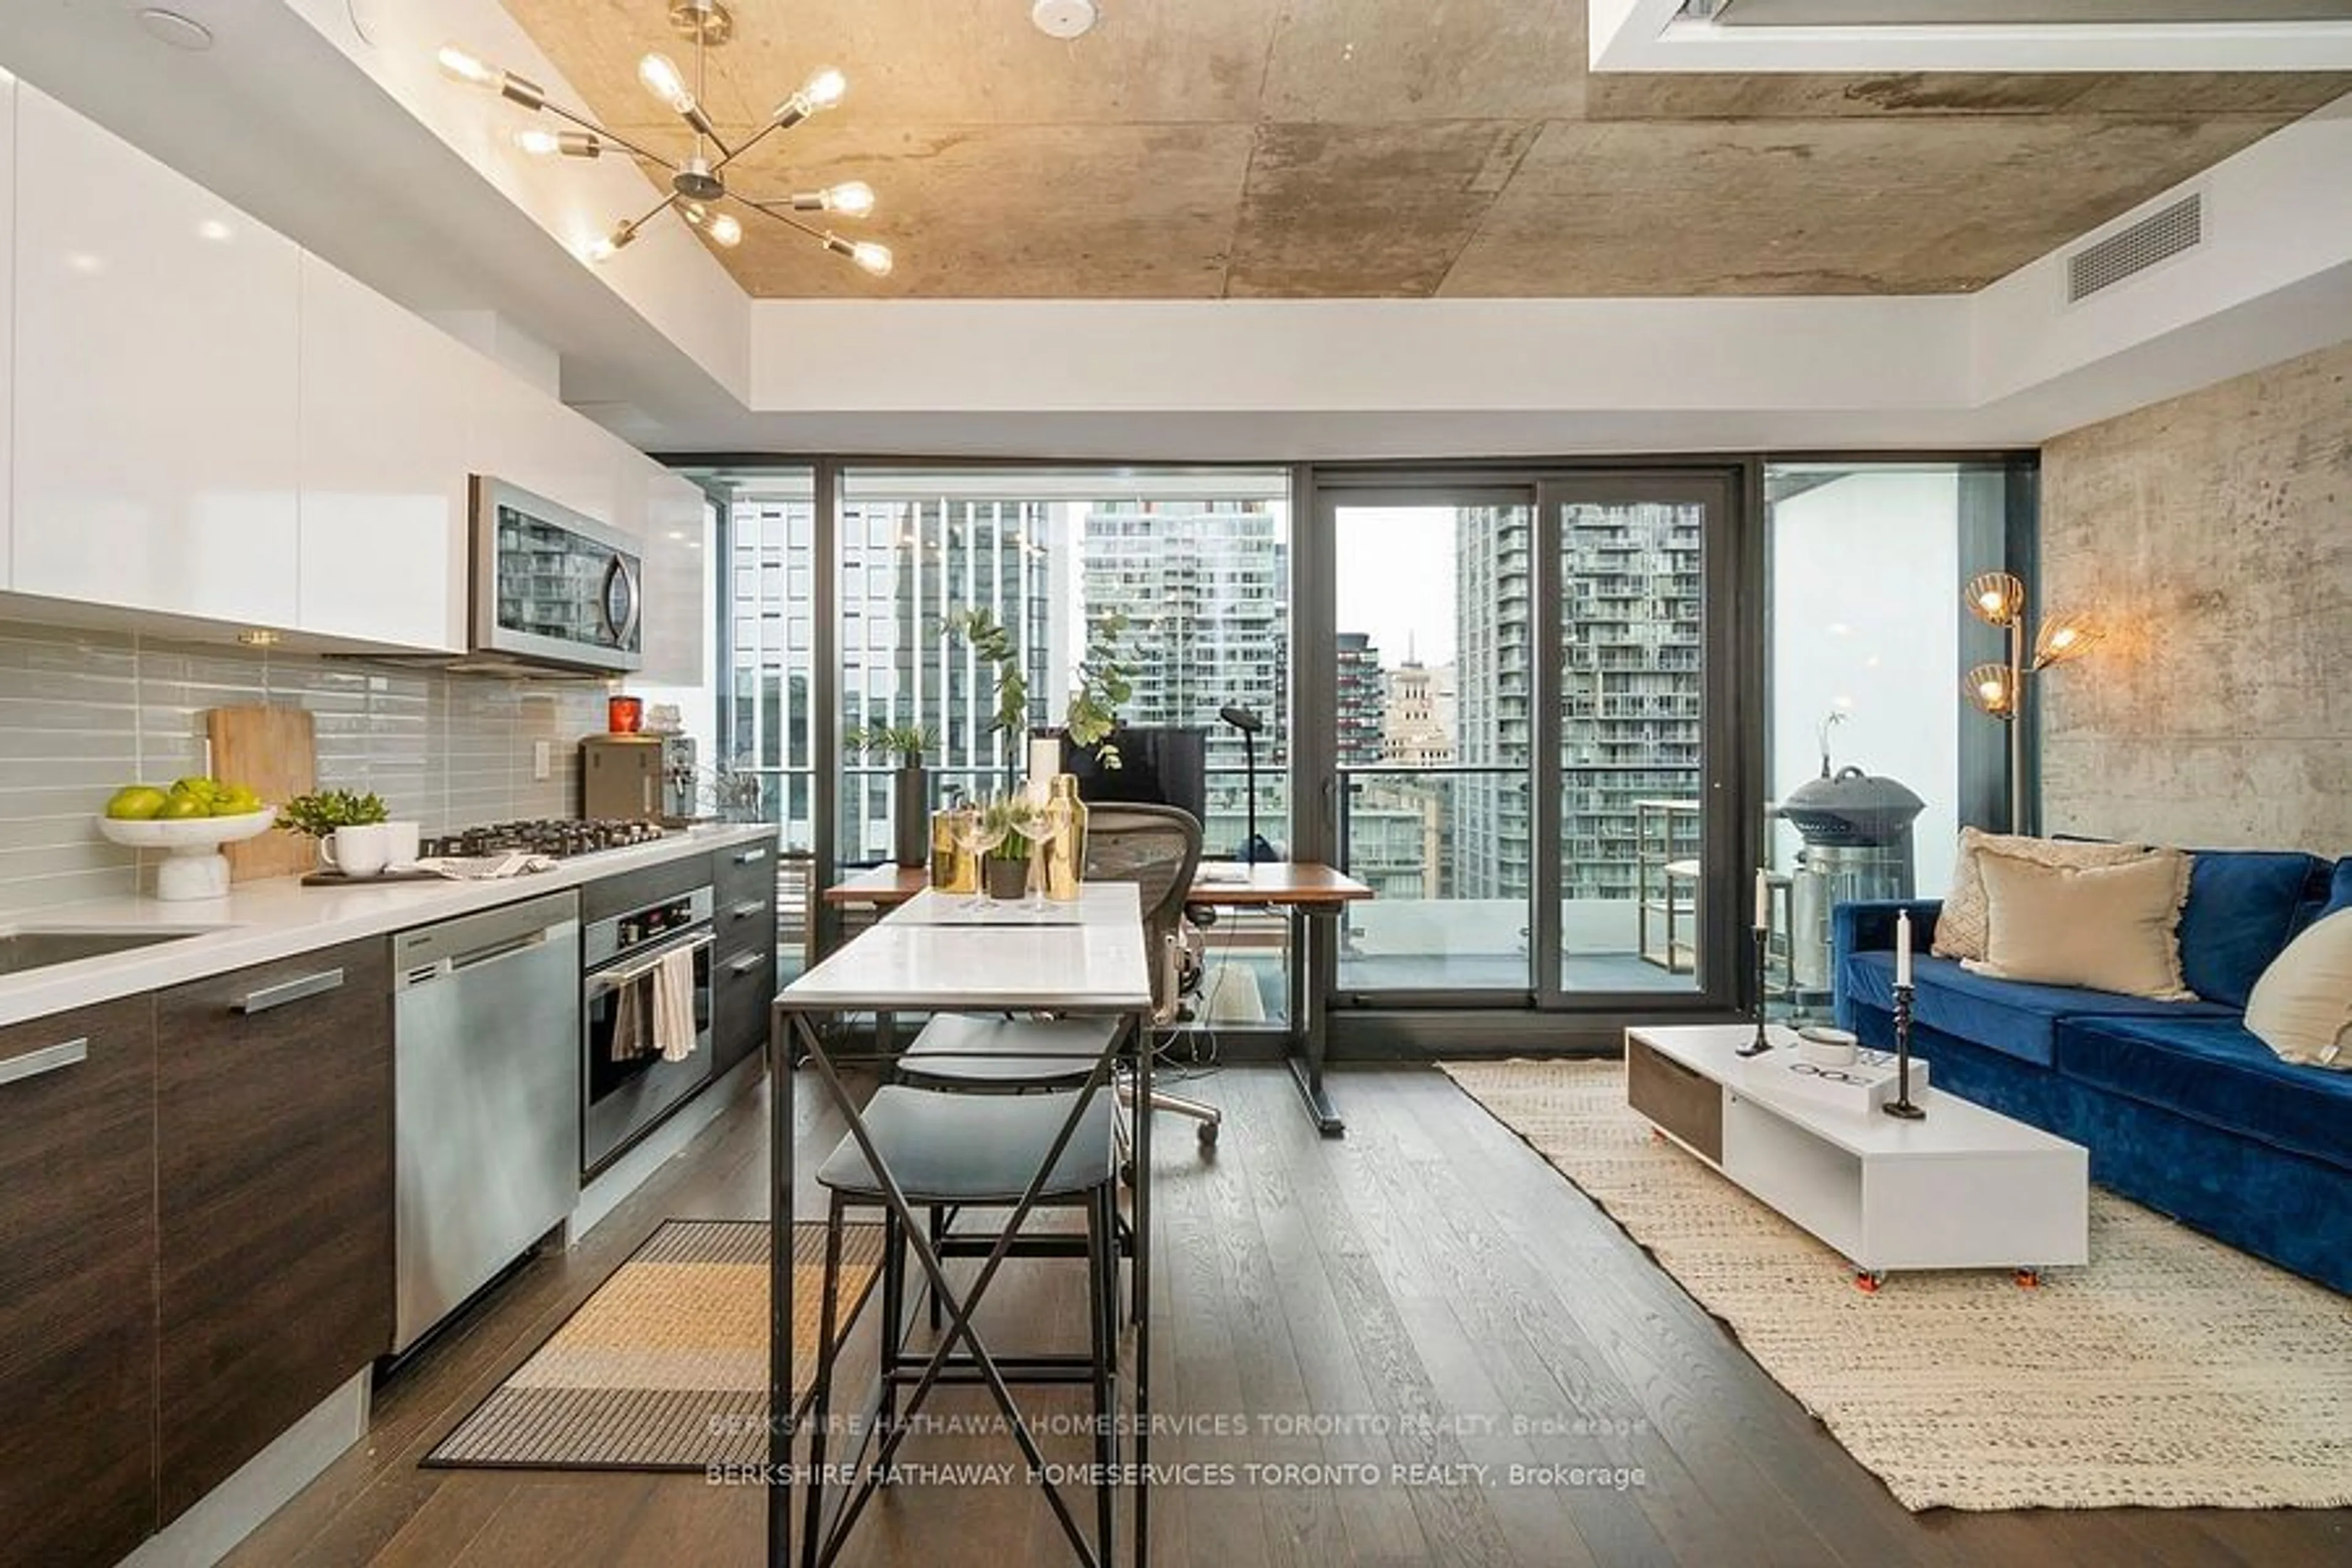 Contemporary kitchen for 224 King St #1702, Toronto Ontario M5V 1H8